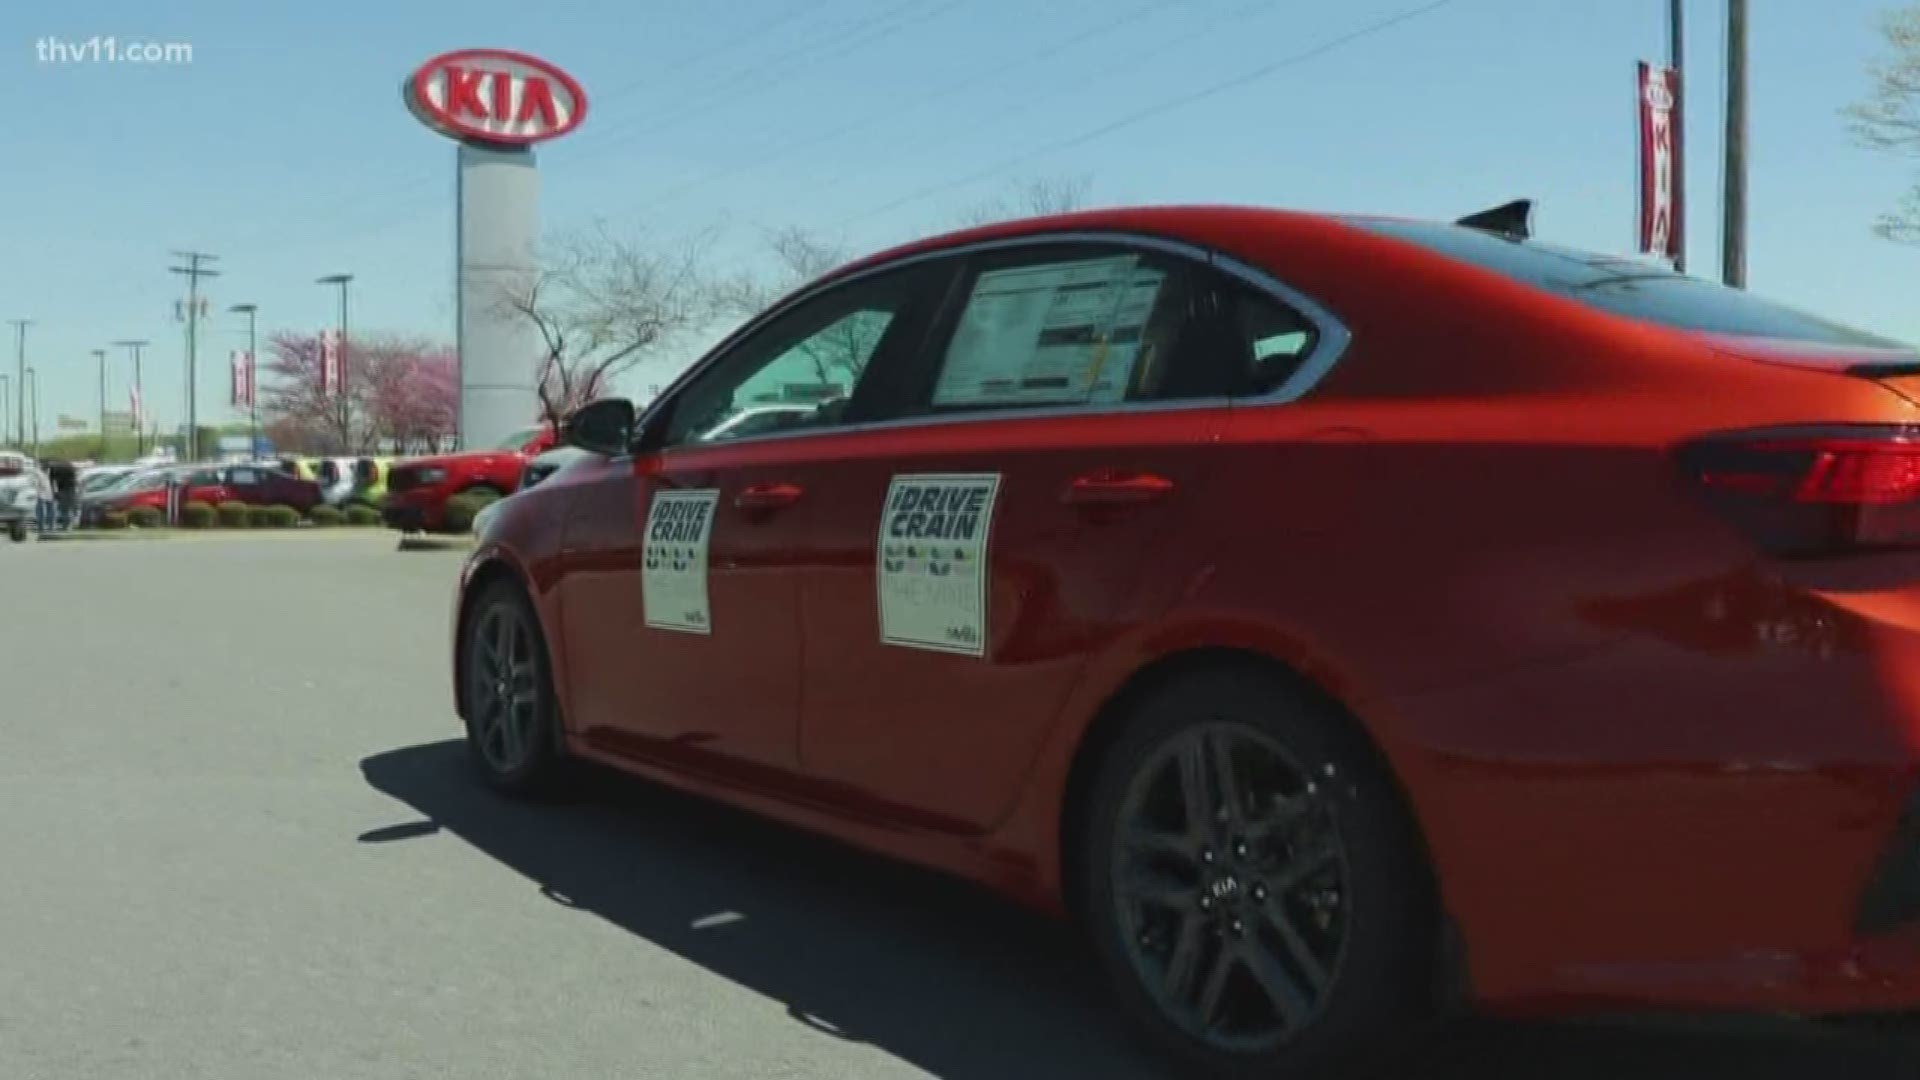 The team at Crain Kia of Sherwood invited The Vine's Adam Bledsoe to test drive the 2019 Kia Forte.